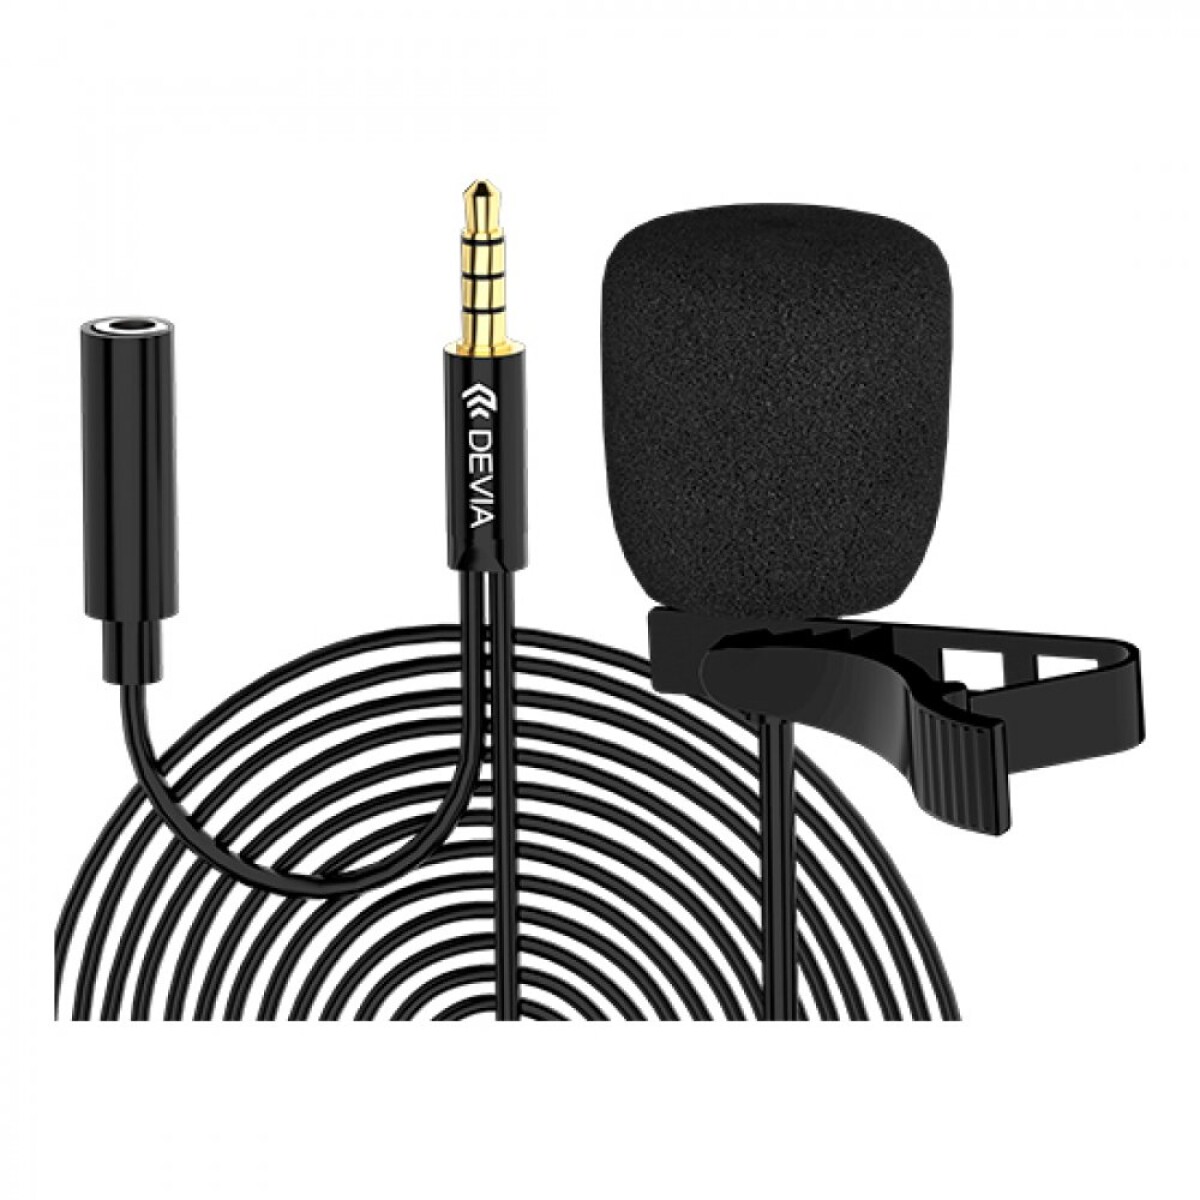 Smart series devia wired microphone 3.5mm 1.5mts - Black 